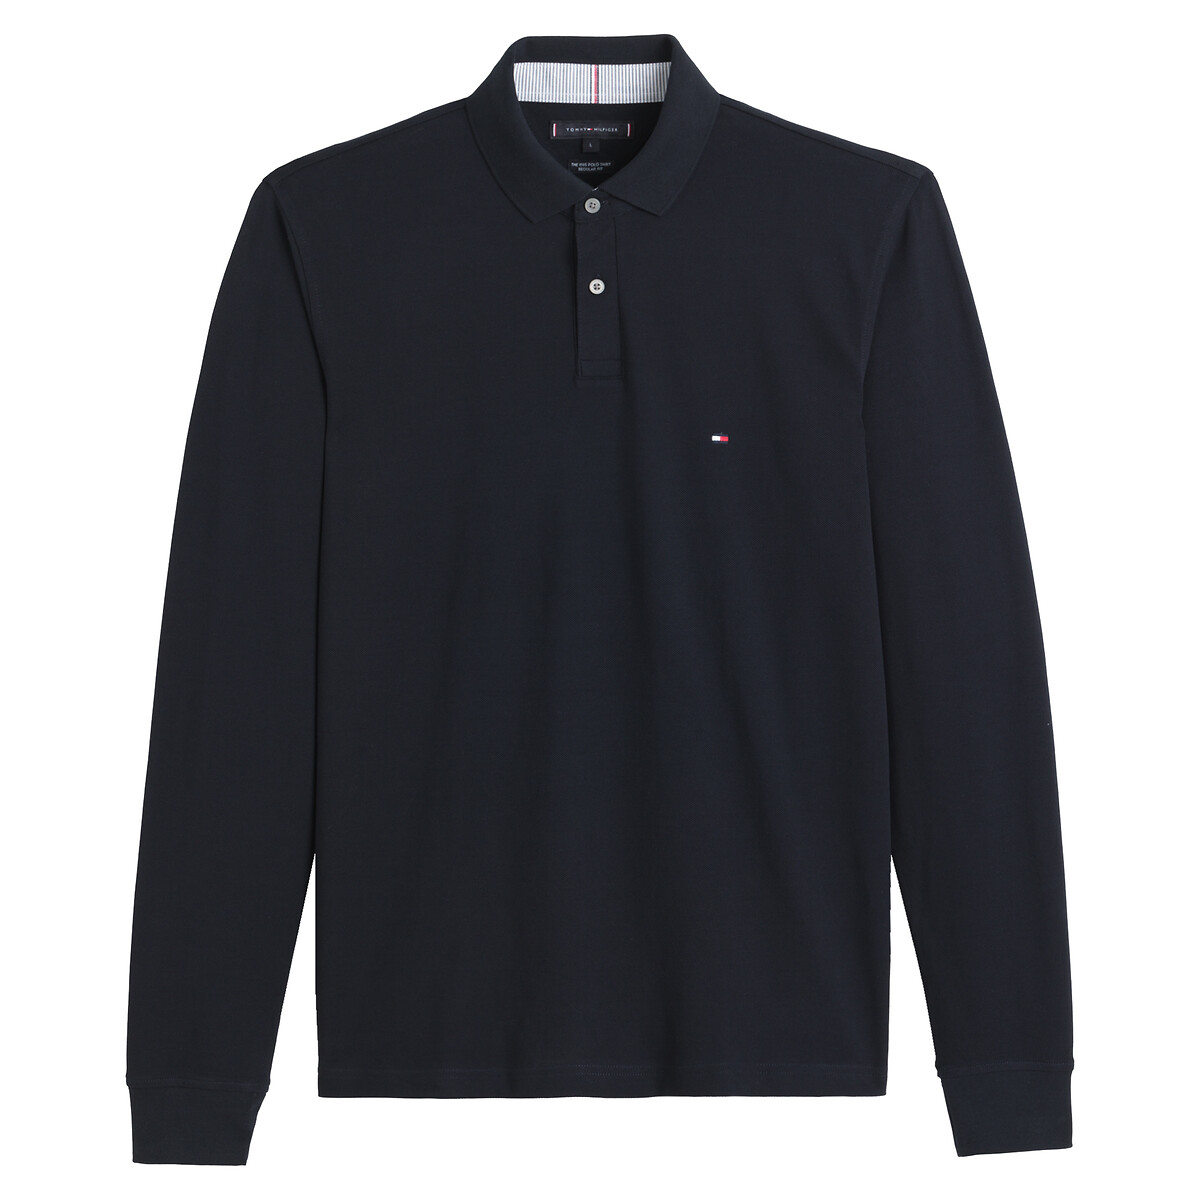 Image of 1985 Organic Cotton Pique Polo Shirt in Regular Fit with Long Sleeves